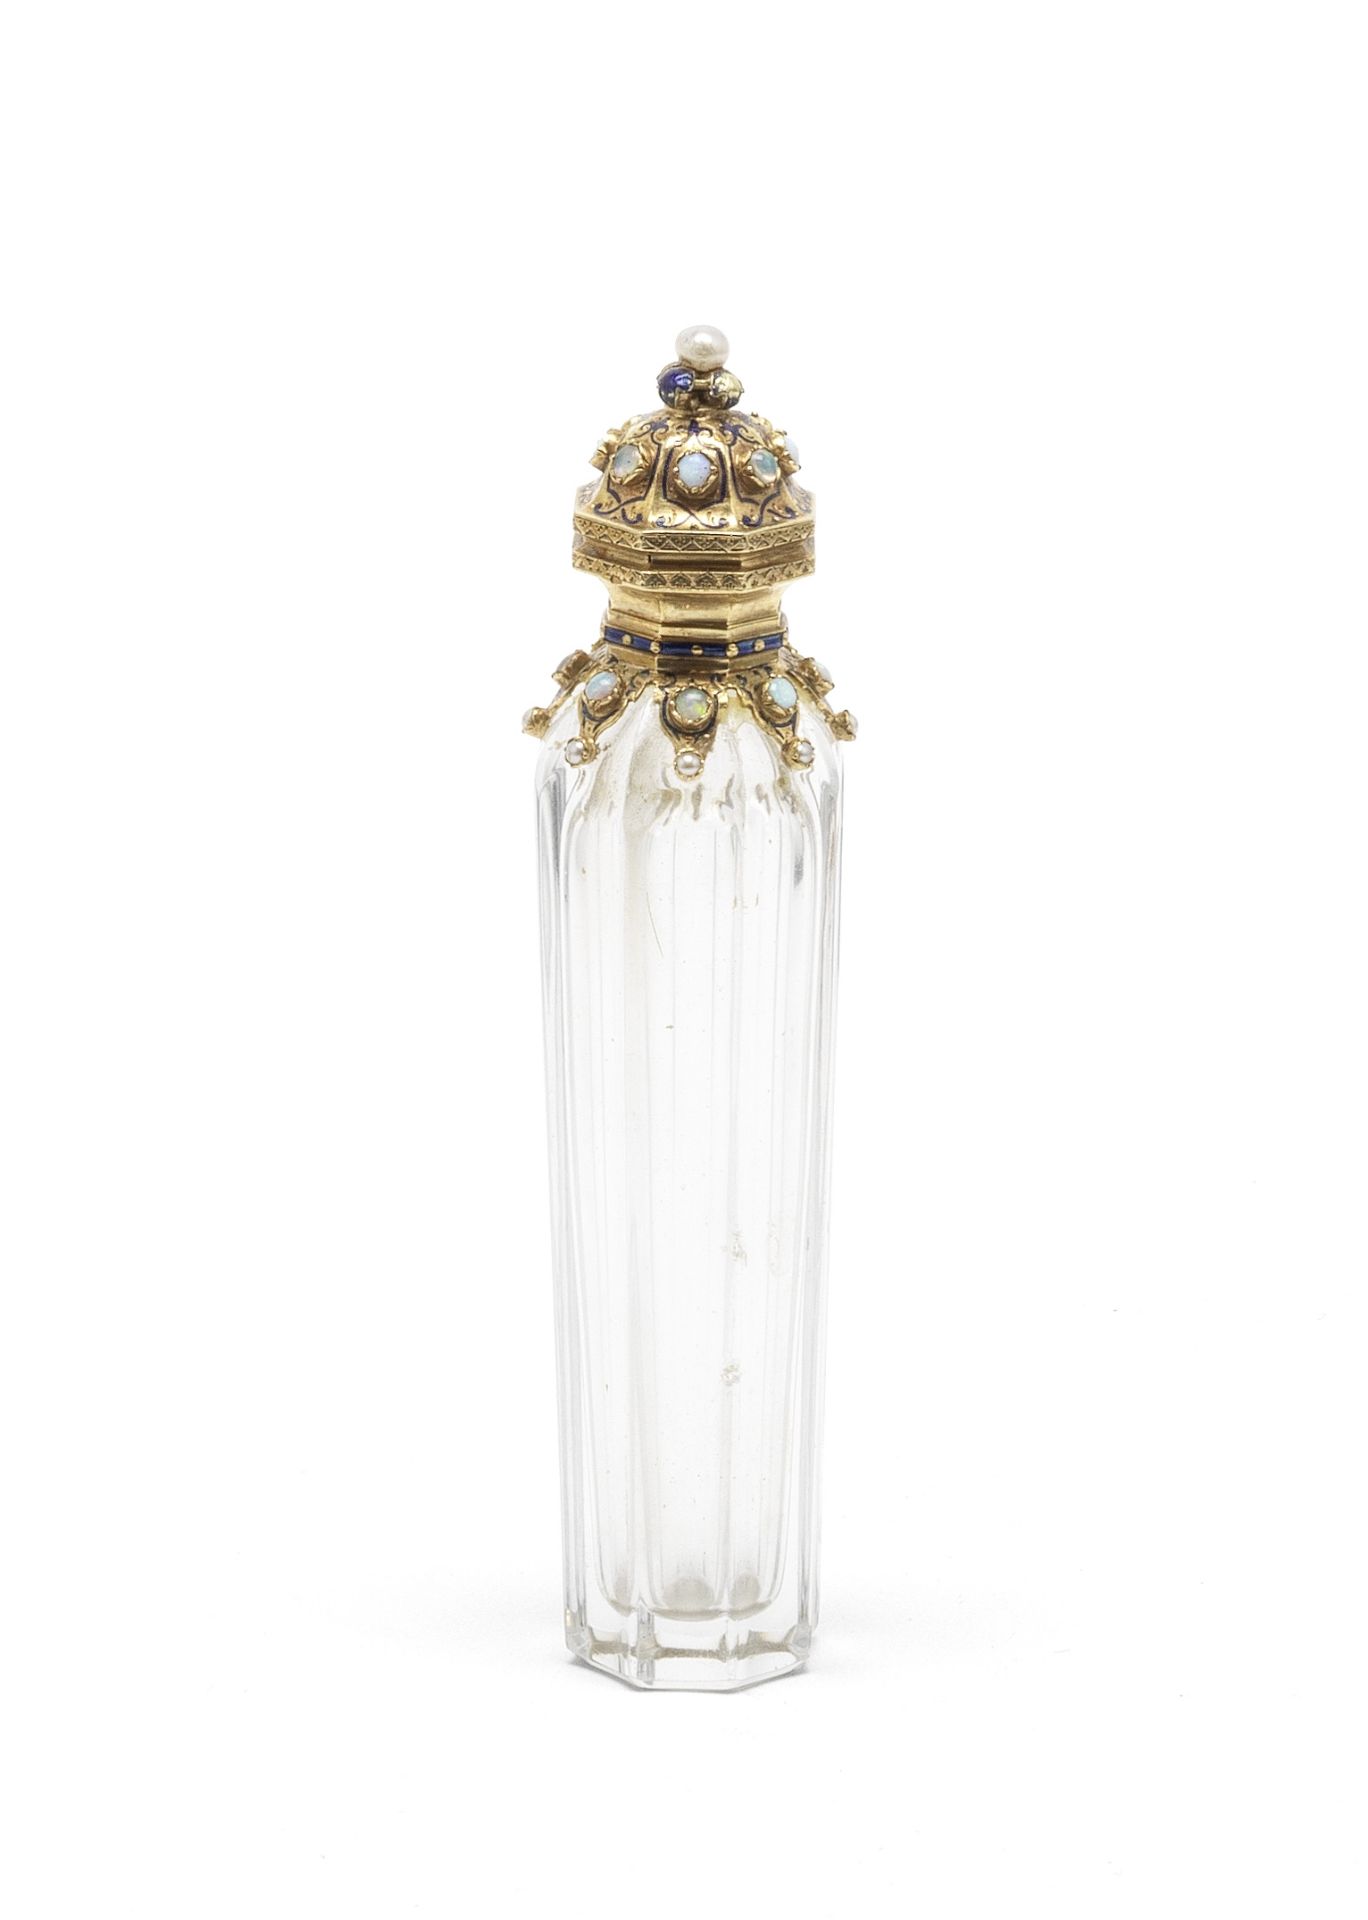 A French gold-mounted scent bottle circa 1870